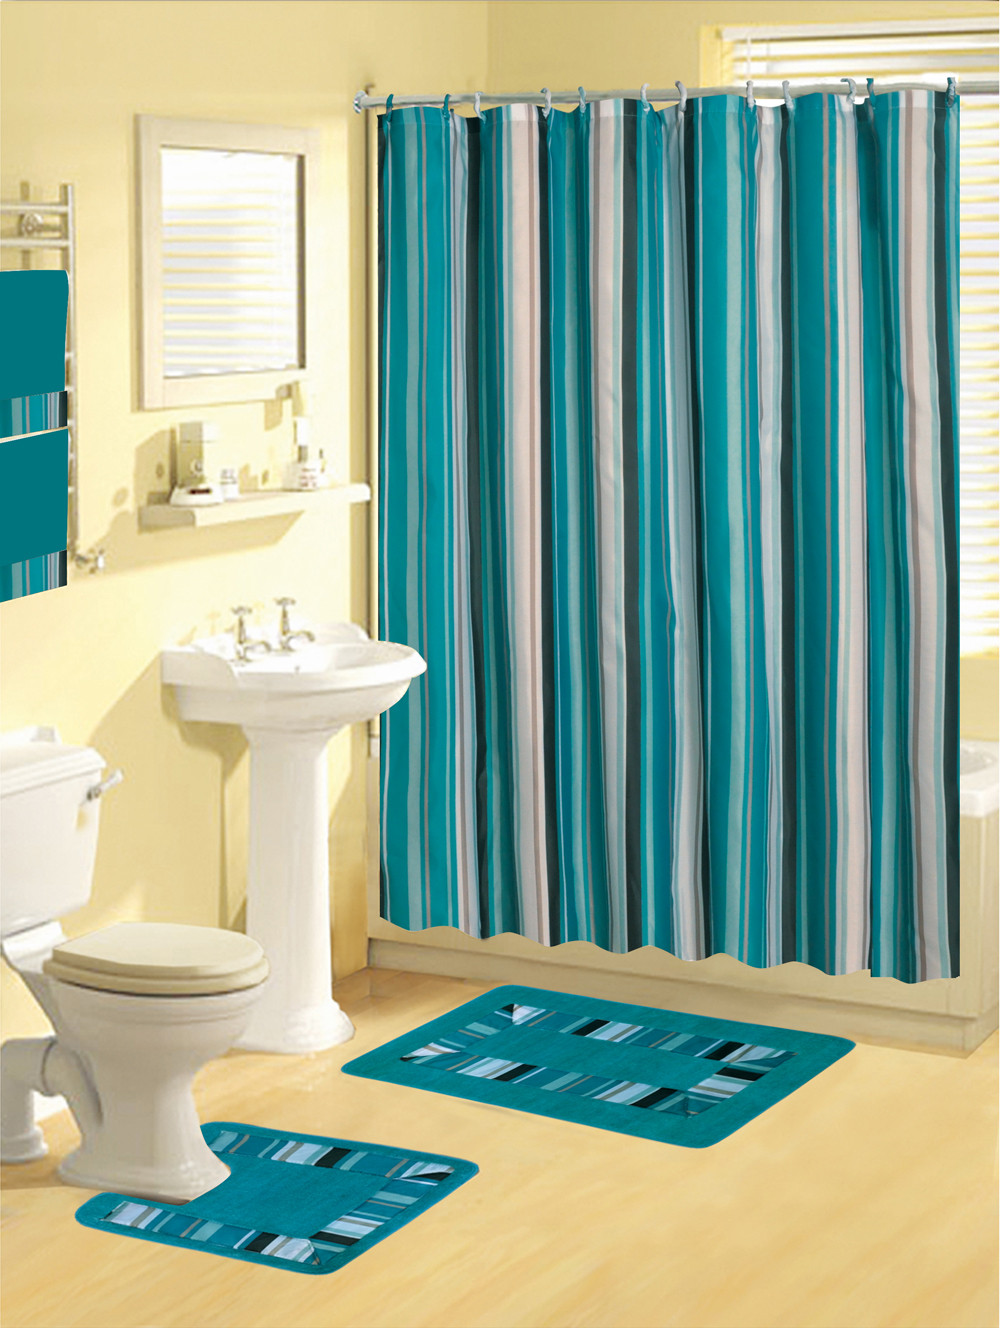 Bathroom Sets With Shower Curtain
 Home Dynamix Boutique Deluxe Shower Curtain and Bath Rug